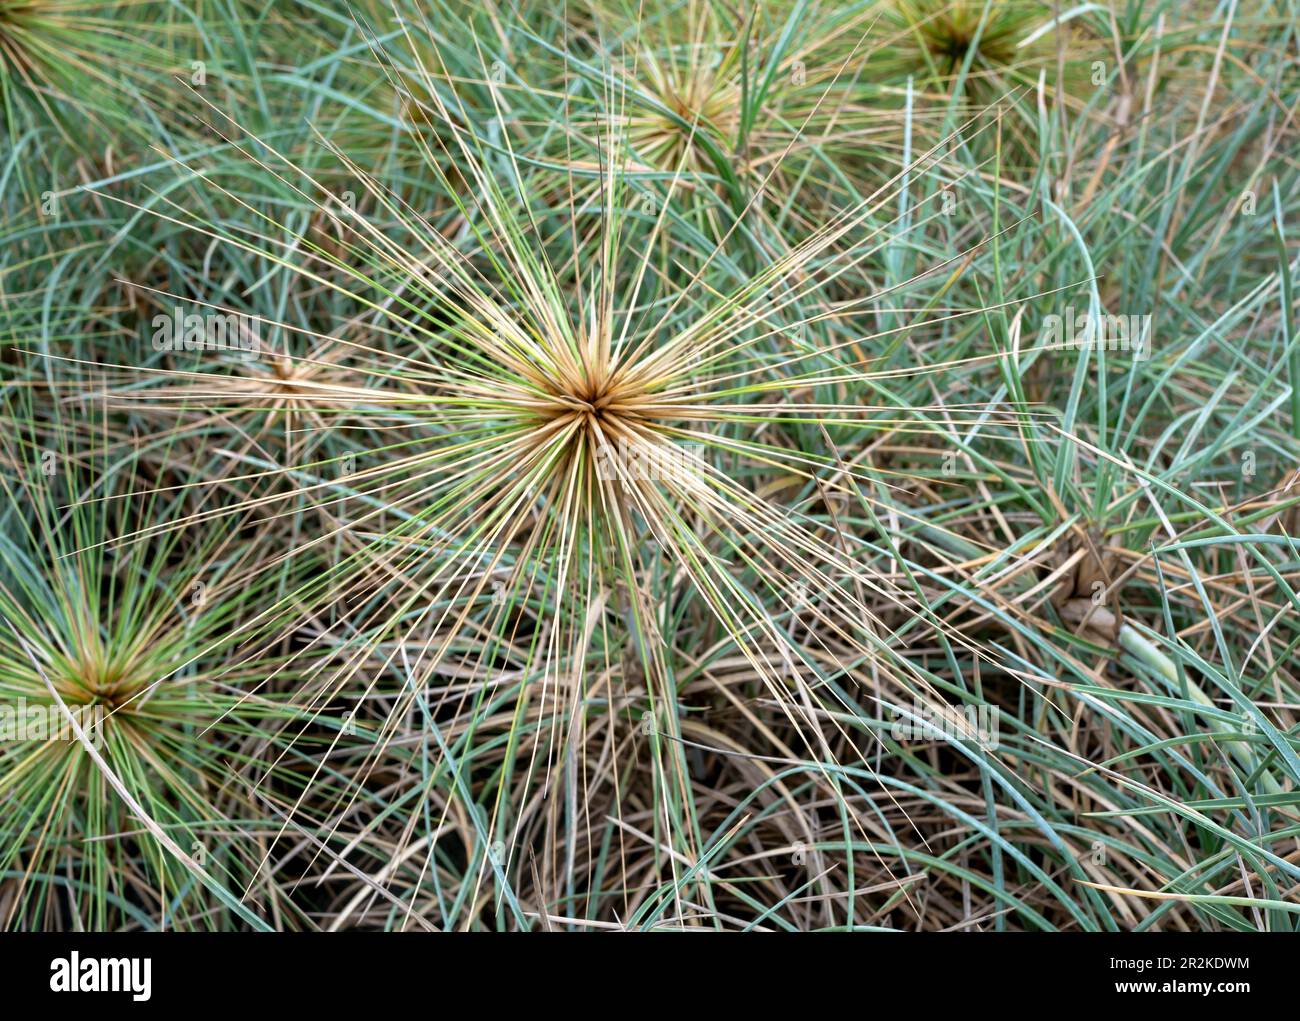 Spinifex longifolius, known as beach spinifex, a perennial grass grows in sandy regions along the seacoast Stock Photo